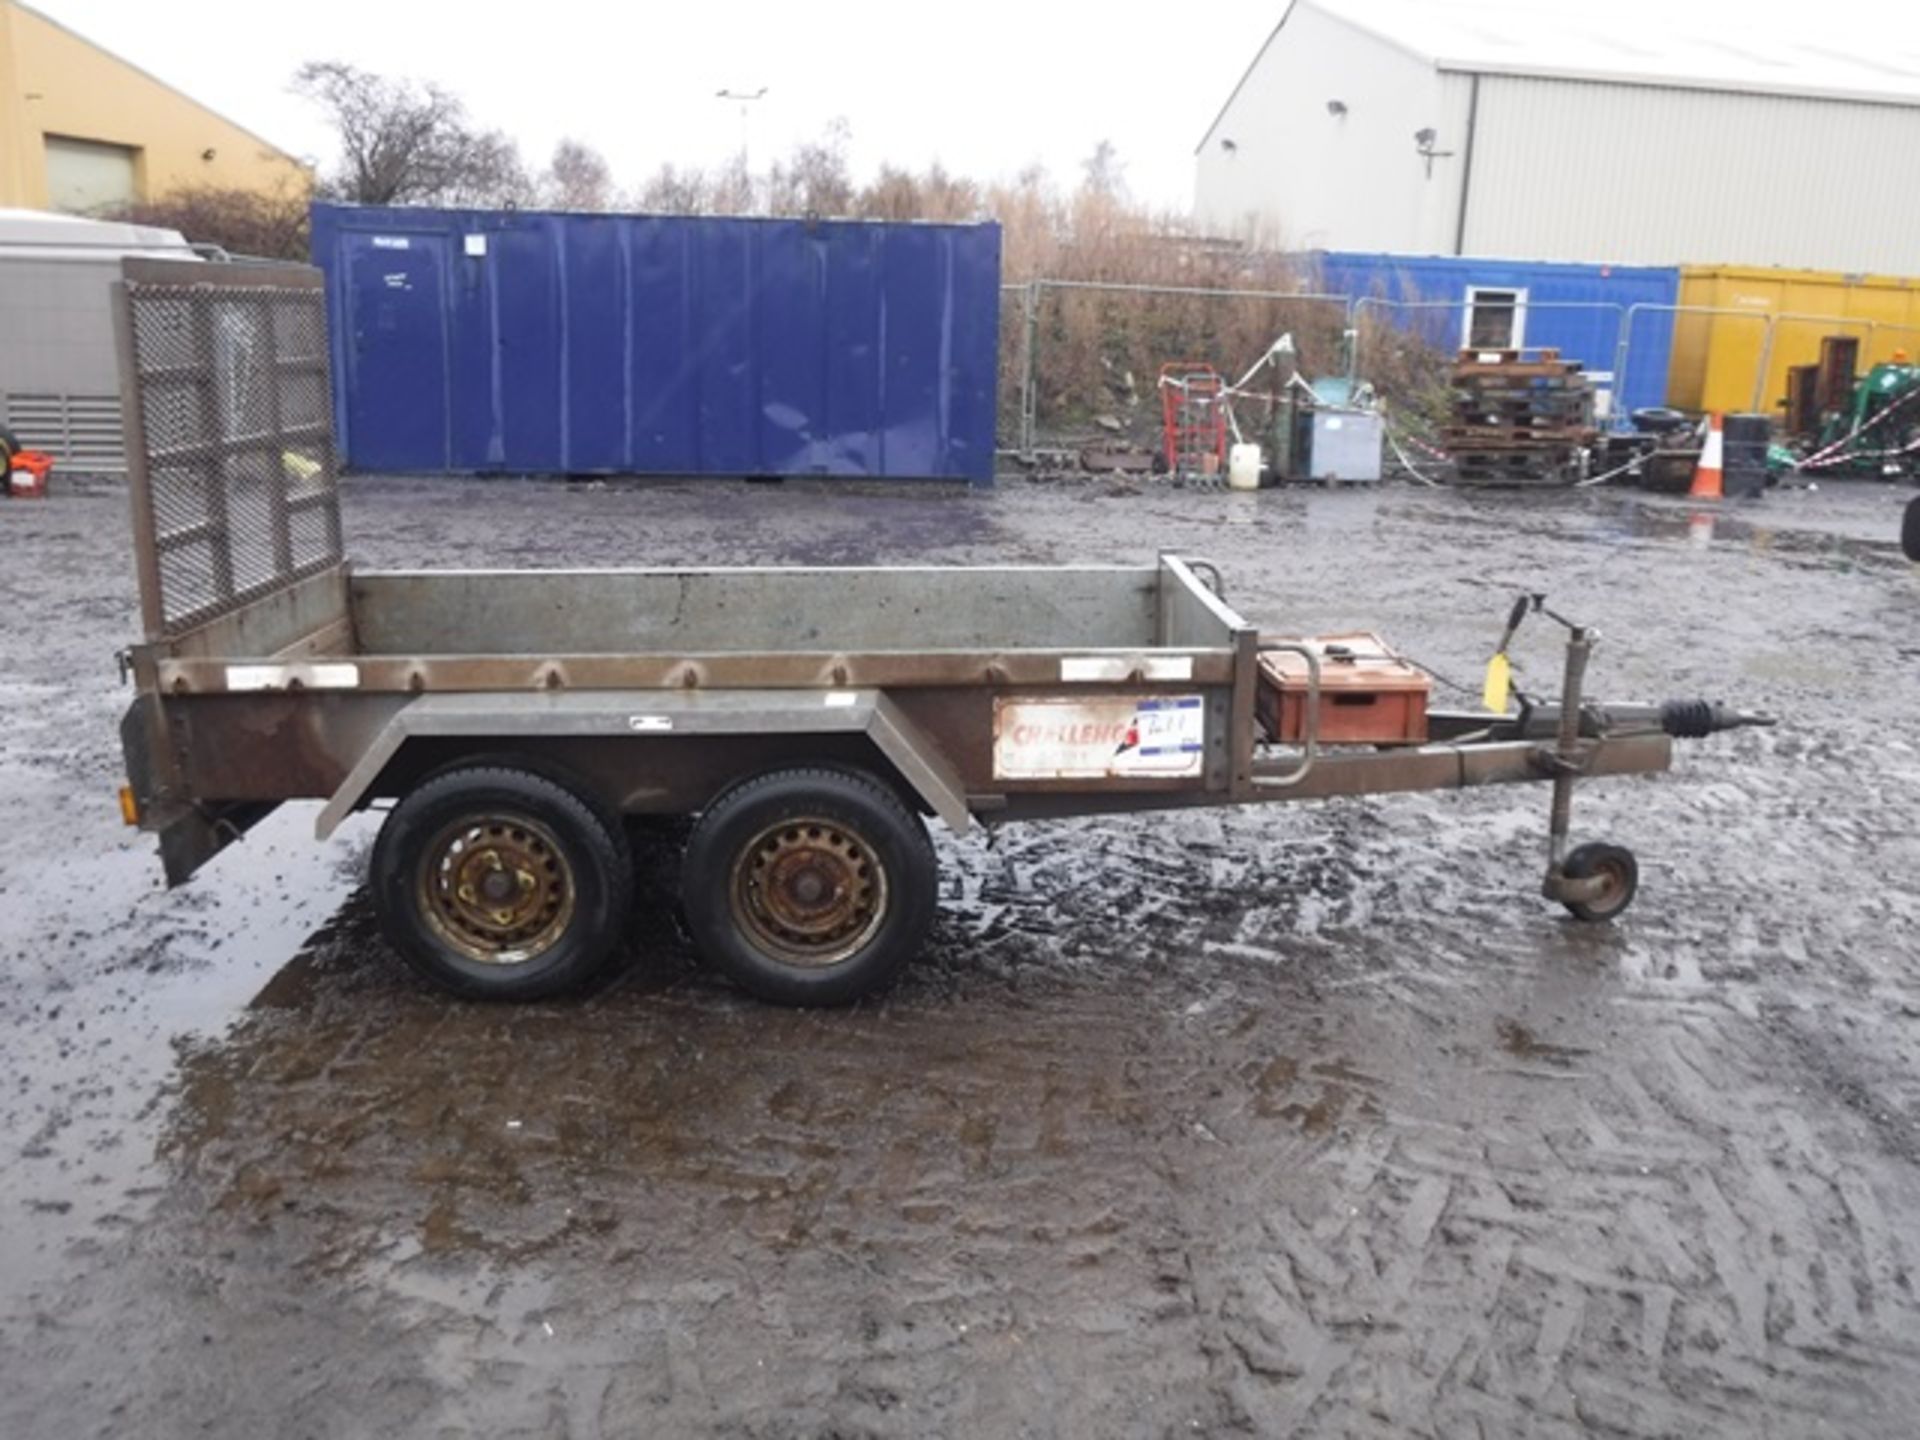 INDESPENSION CHALLANGER 8'X4' TWIN AXLE PLANT TRAILER C/W LOADING RAMP. SNG042949. ASSET NO. 758-939